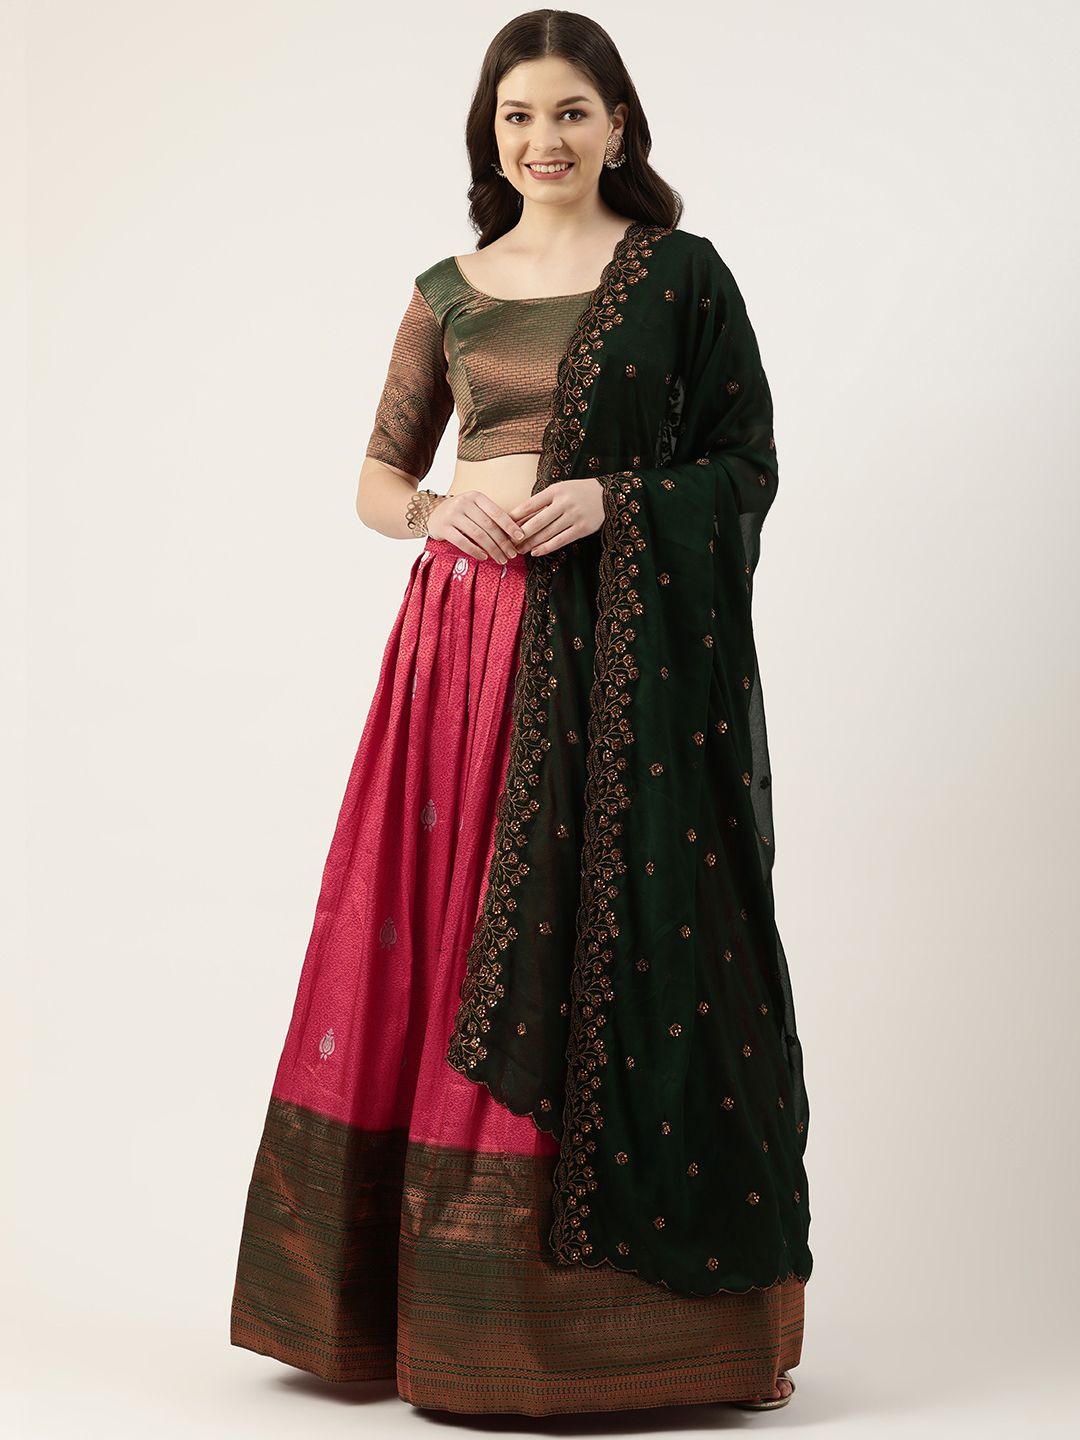 Pothys Pink & Green Unstitched Lehenga & Blouse With Dupatta Price in India